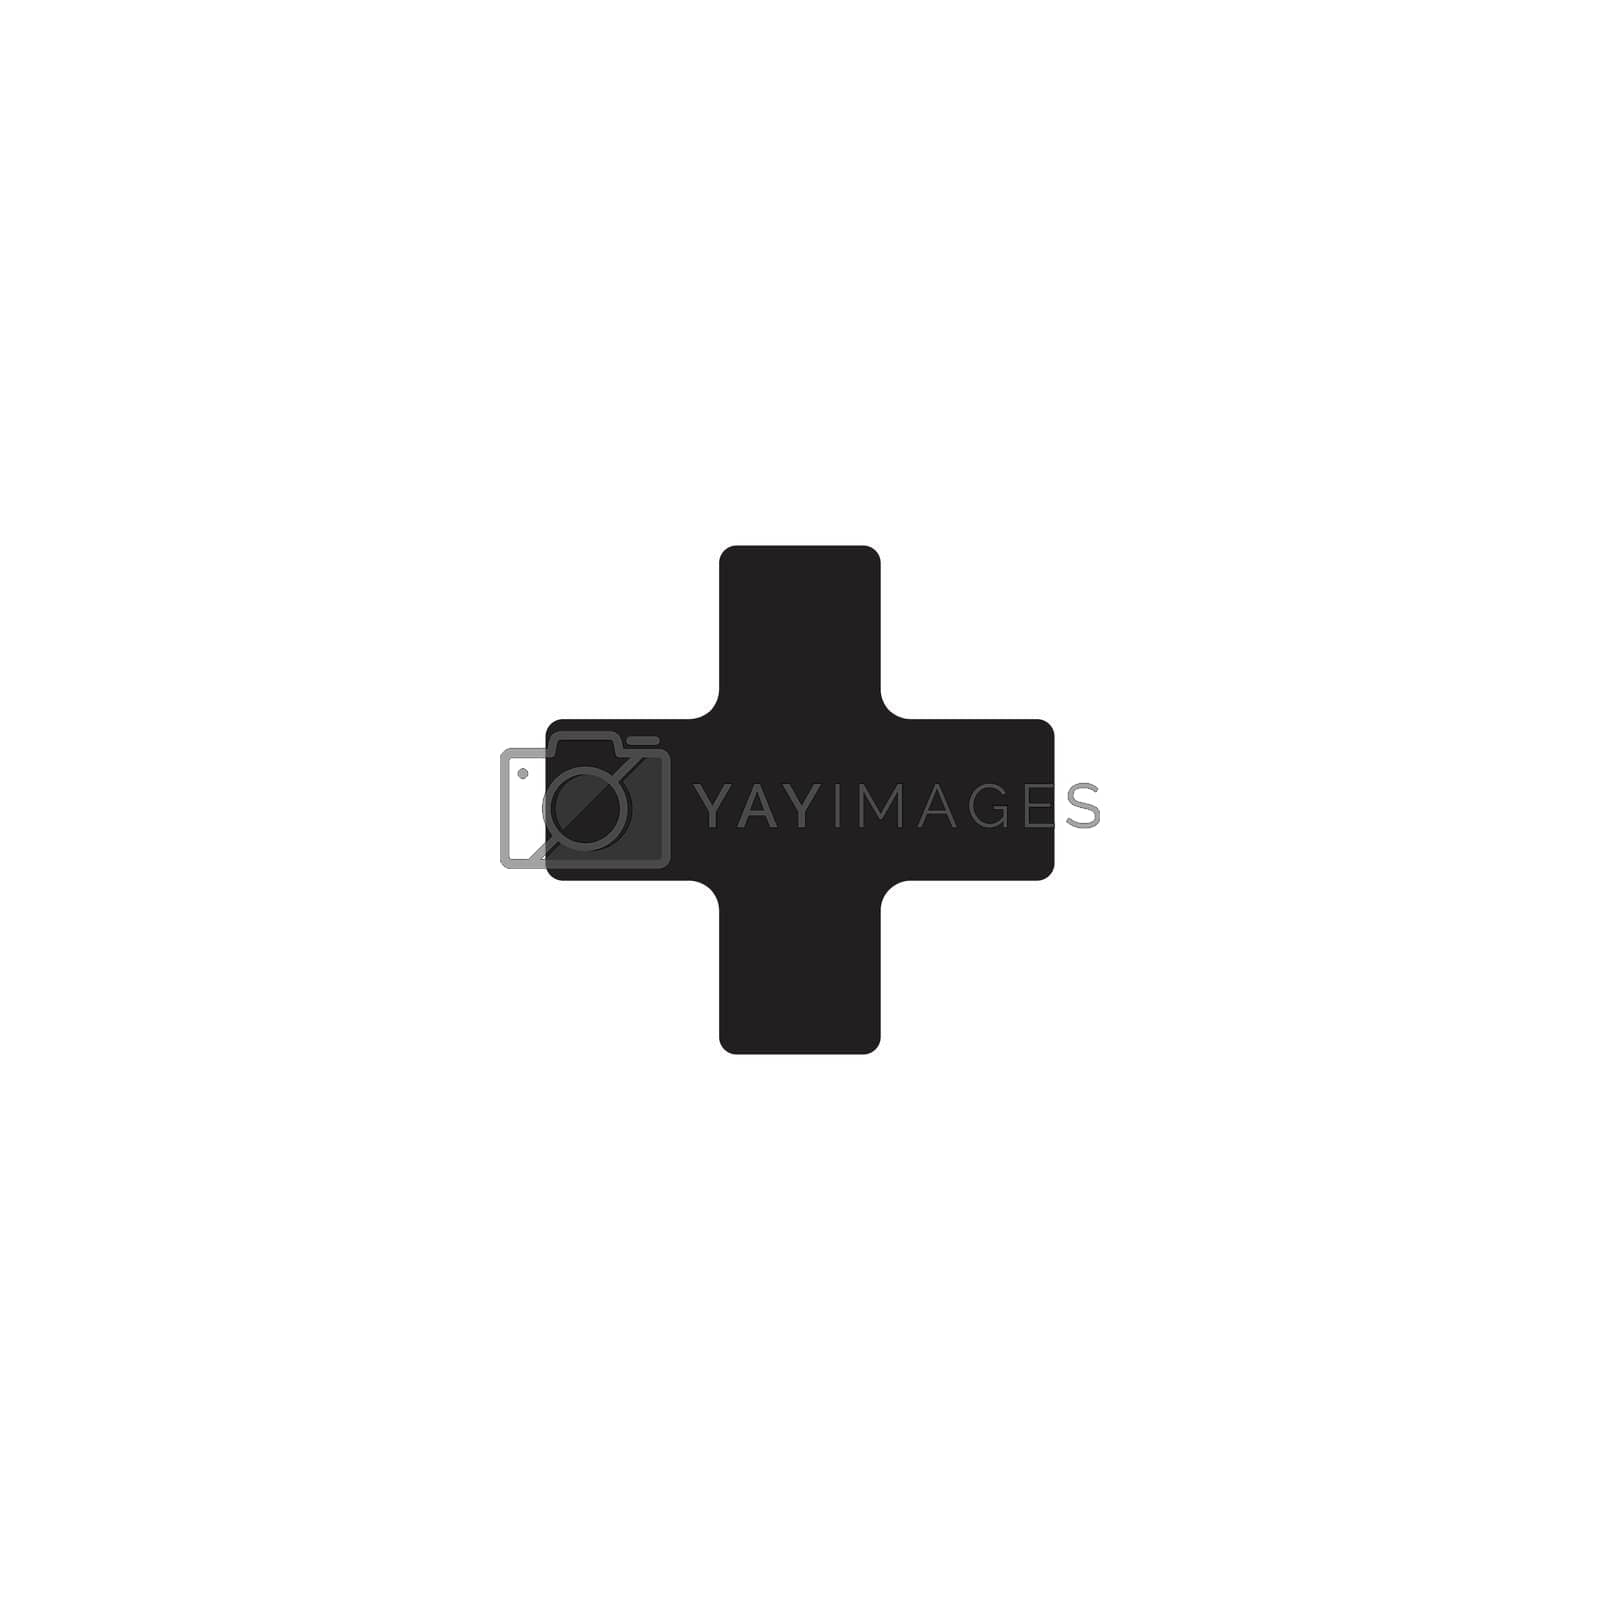 Royalty free image of Add plus cross icon. Addition math sign. Medical health symbol. Stock Vector illustration isolated on white background. by Kyrylov